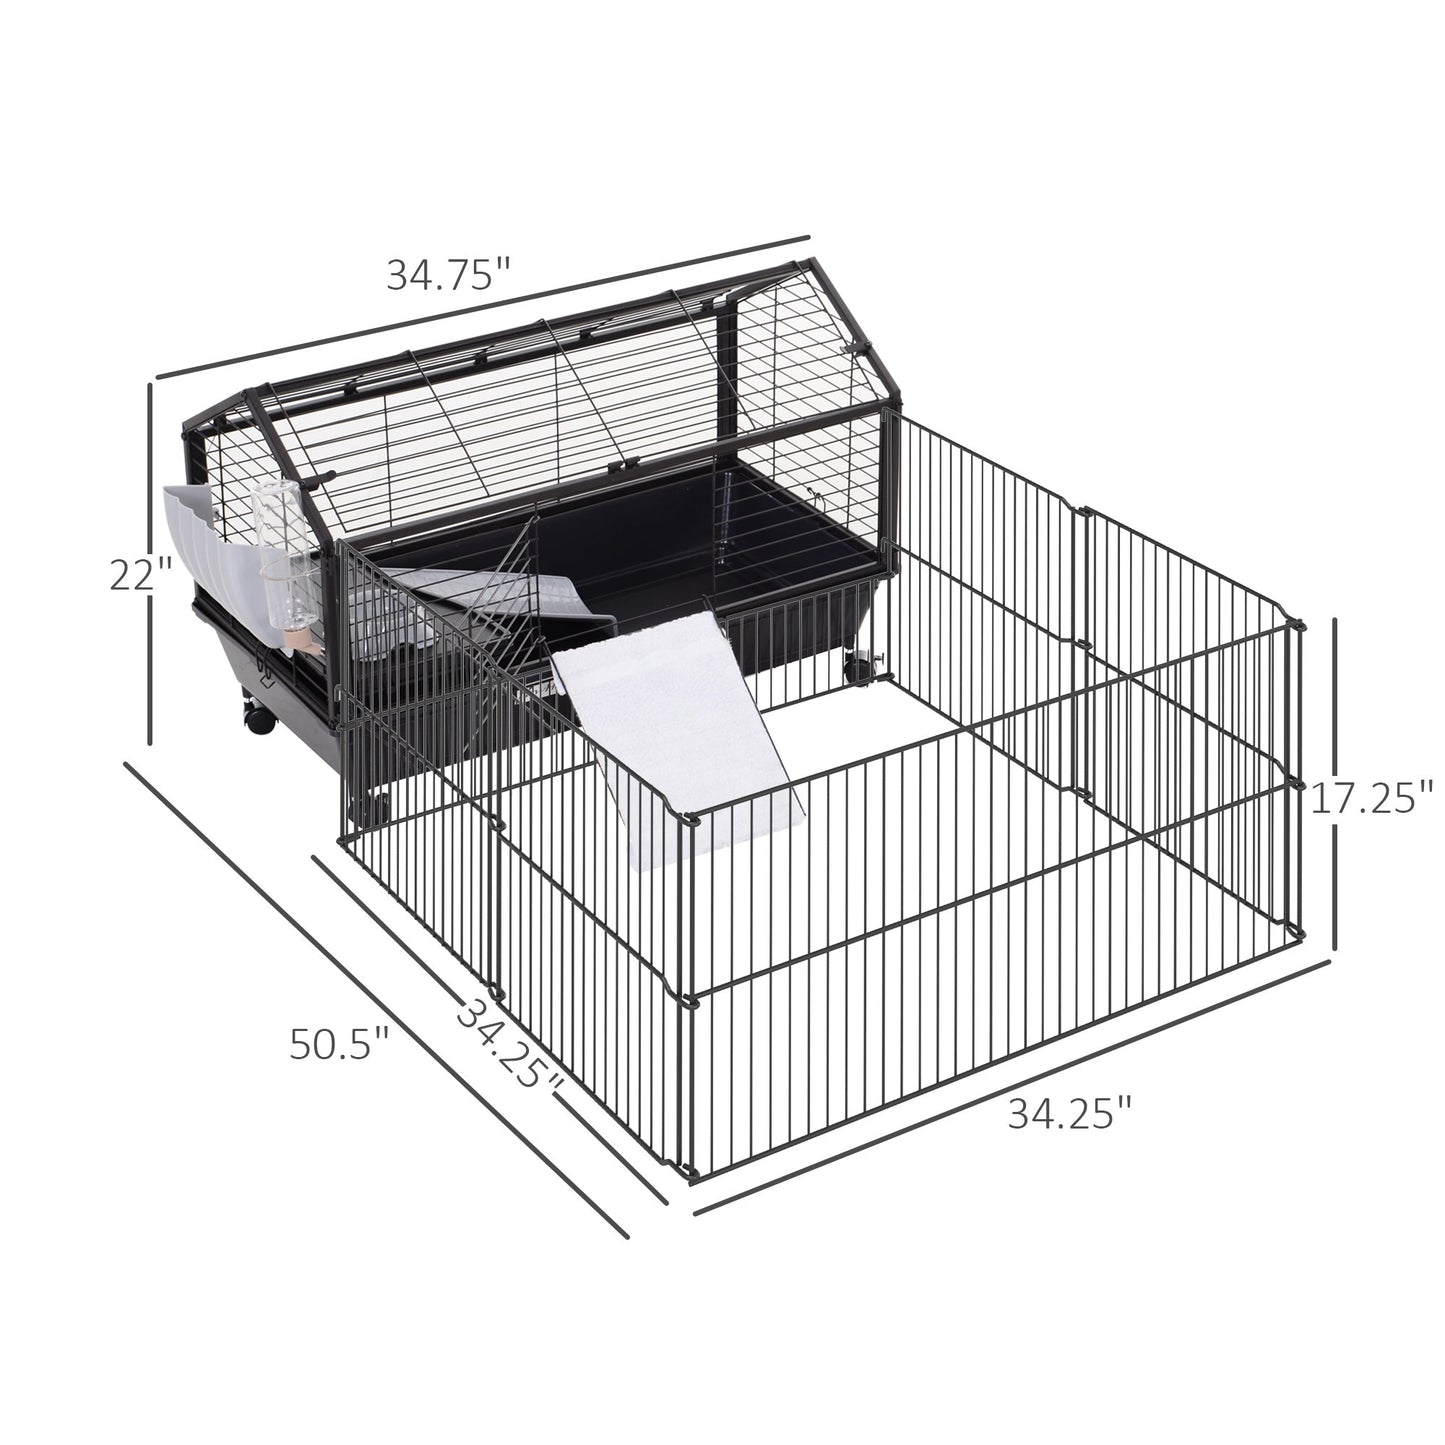 -PawHut 35"L Small Animal Hutch Cage, Bunny Playpen with Main House with Rolling Wheel, Guinea Pig & Chinchilla Cage, Black - Outdoor Style Company